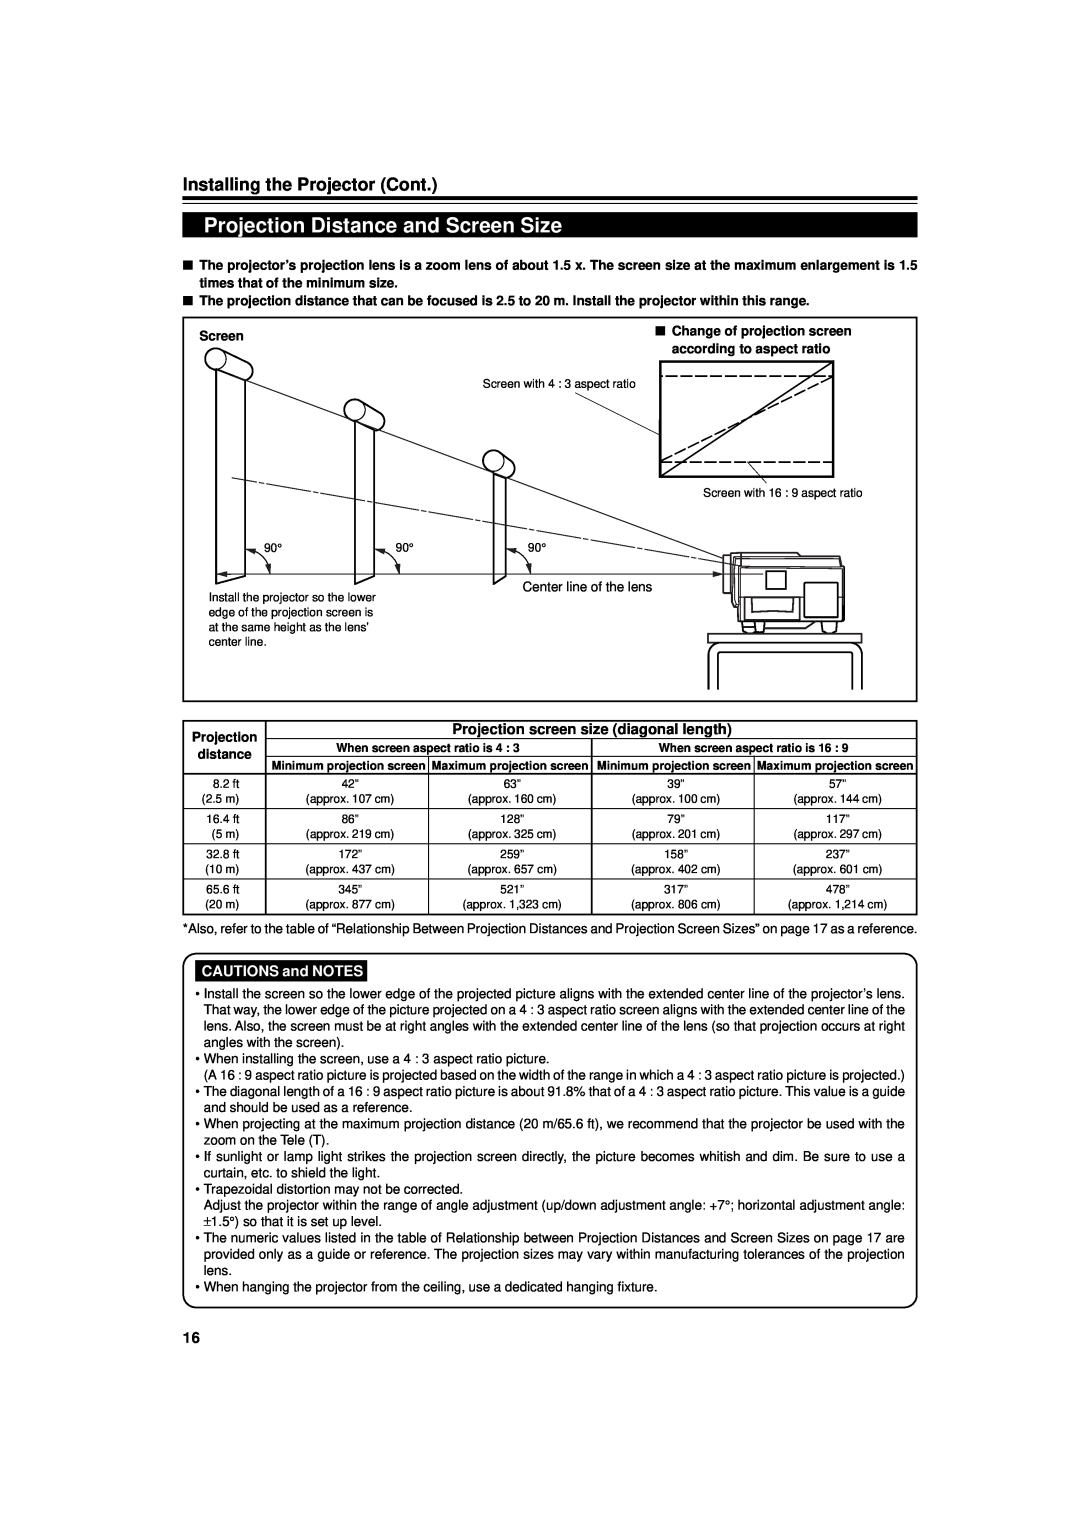 JVC DLA-G15U Projection Distance and Screen Size, Installing the Projector Cont, Projection screen size diagonal length 